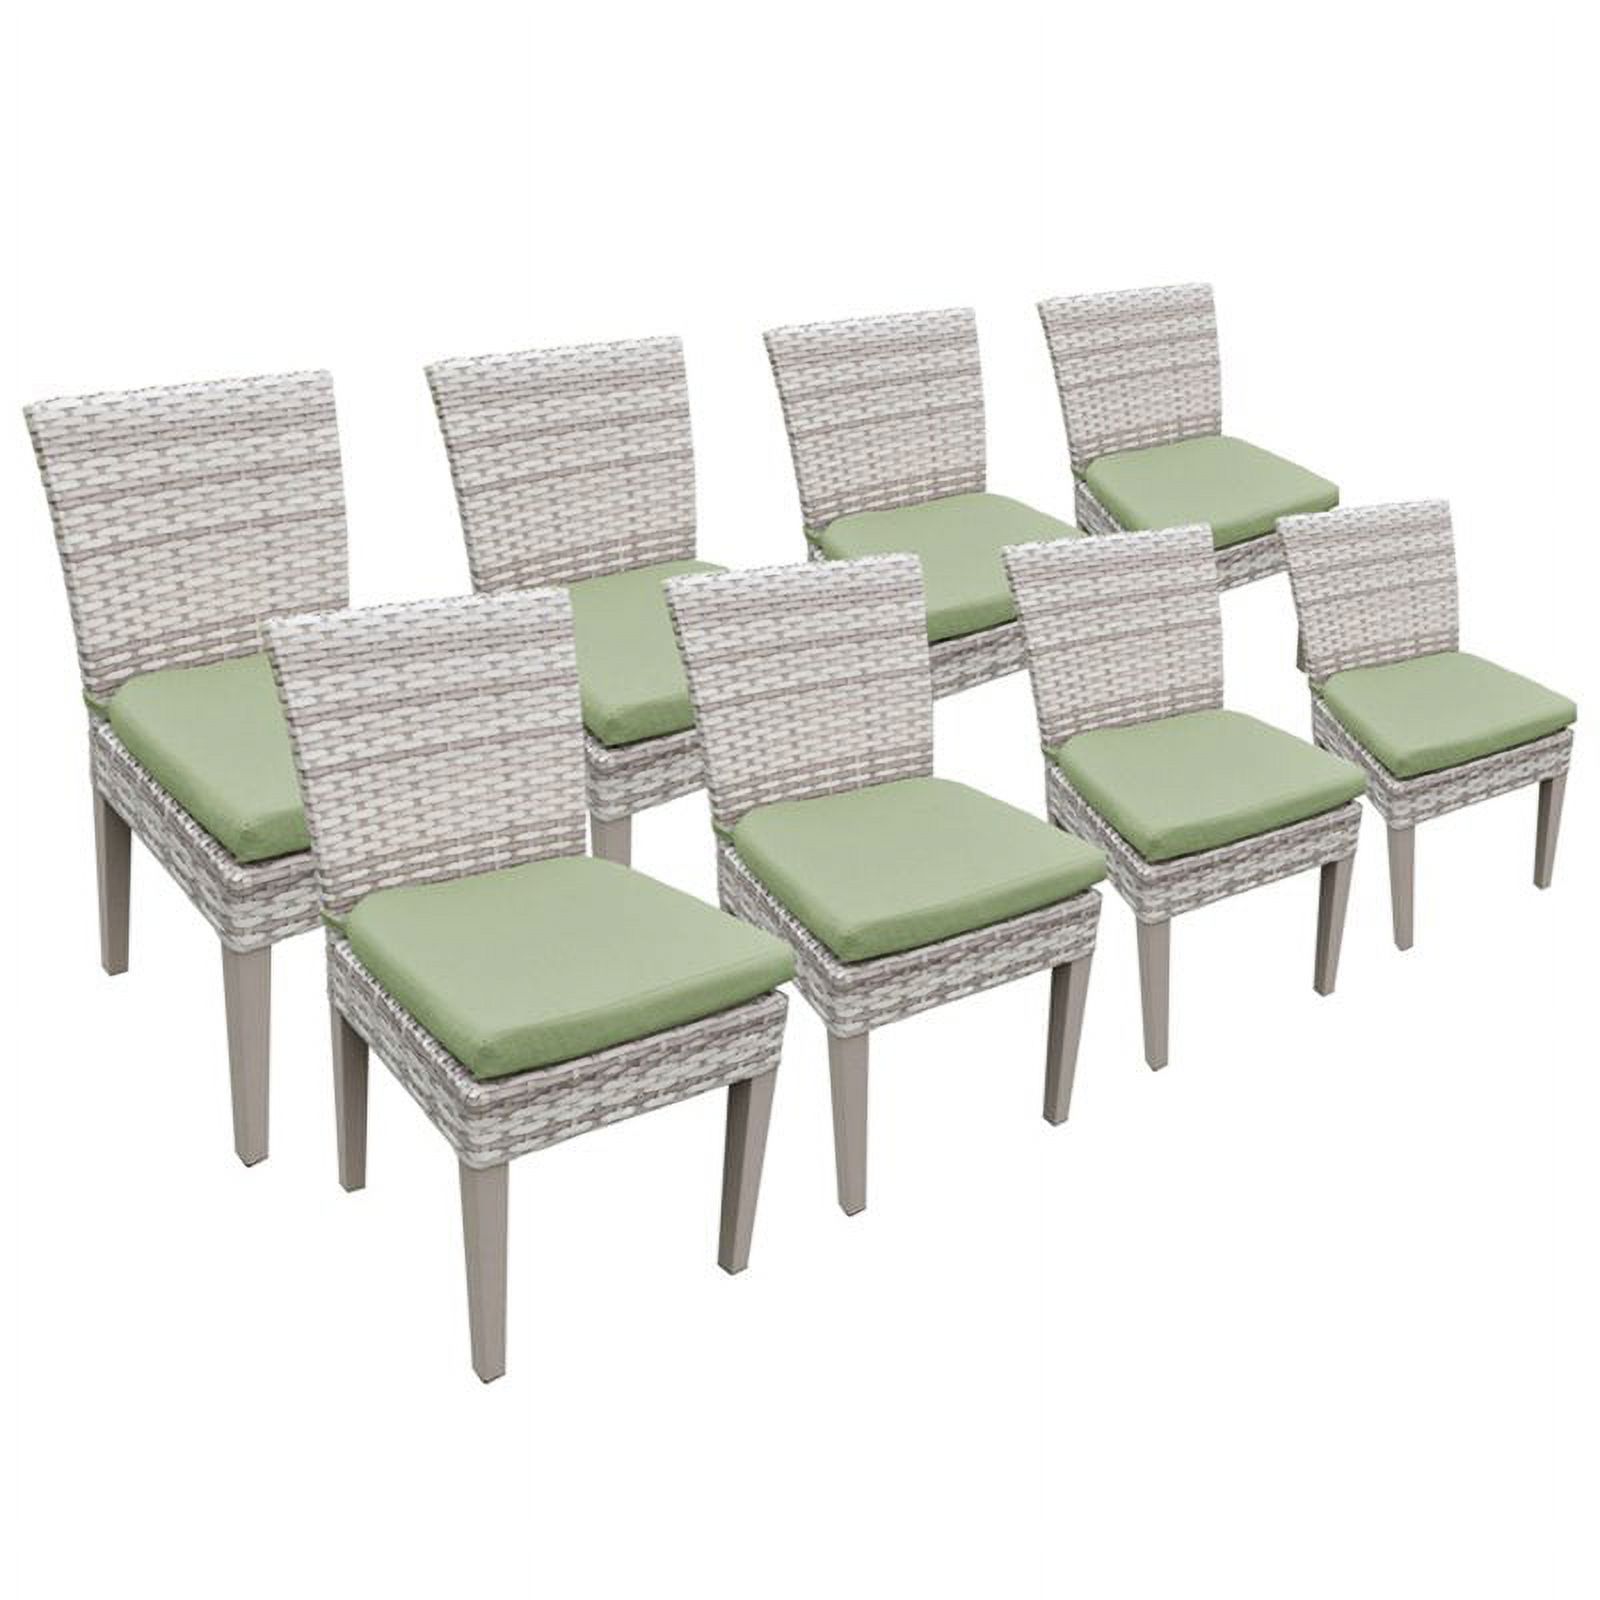 8 fairmont armless dining chairs-color:cilantro - image 1 of 2